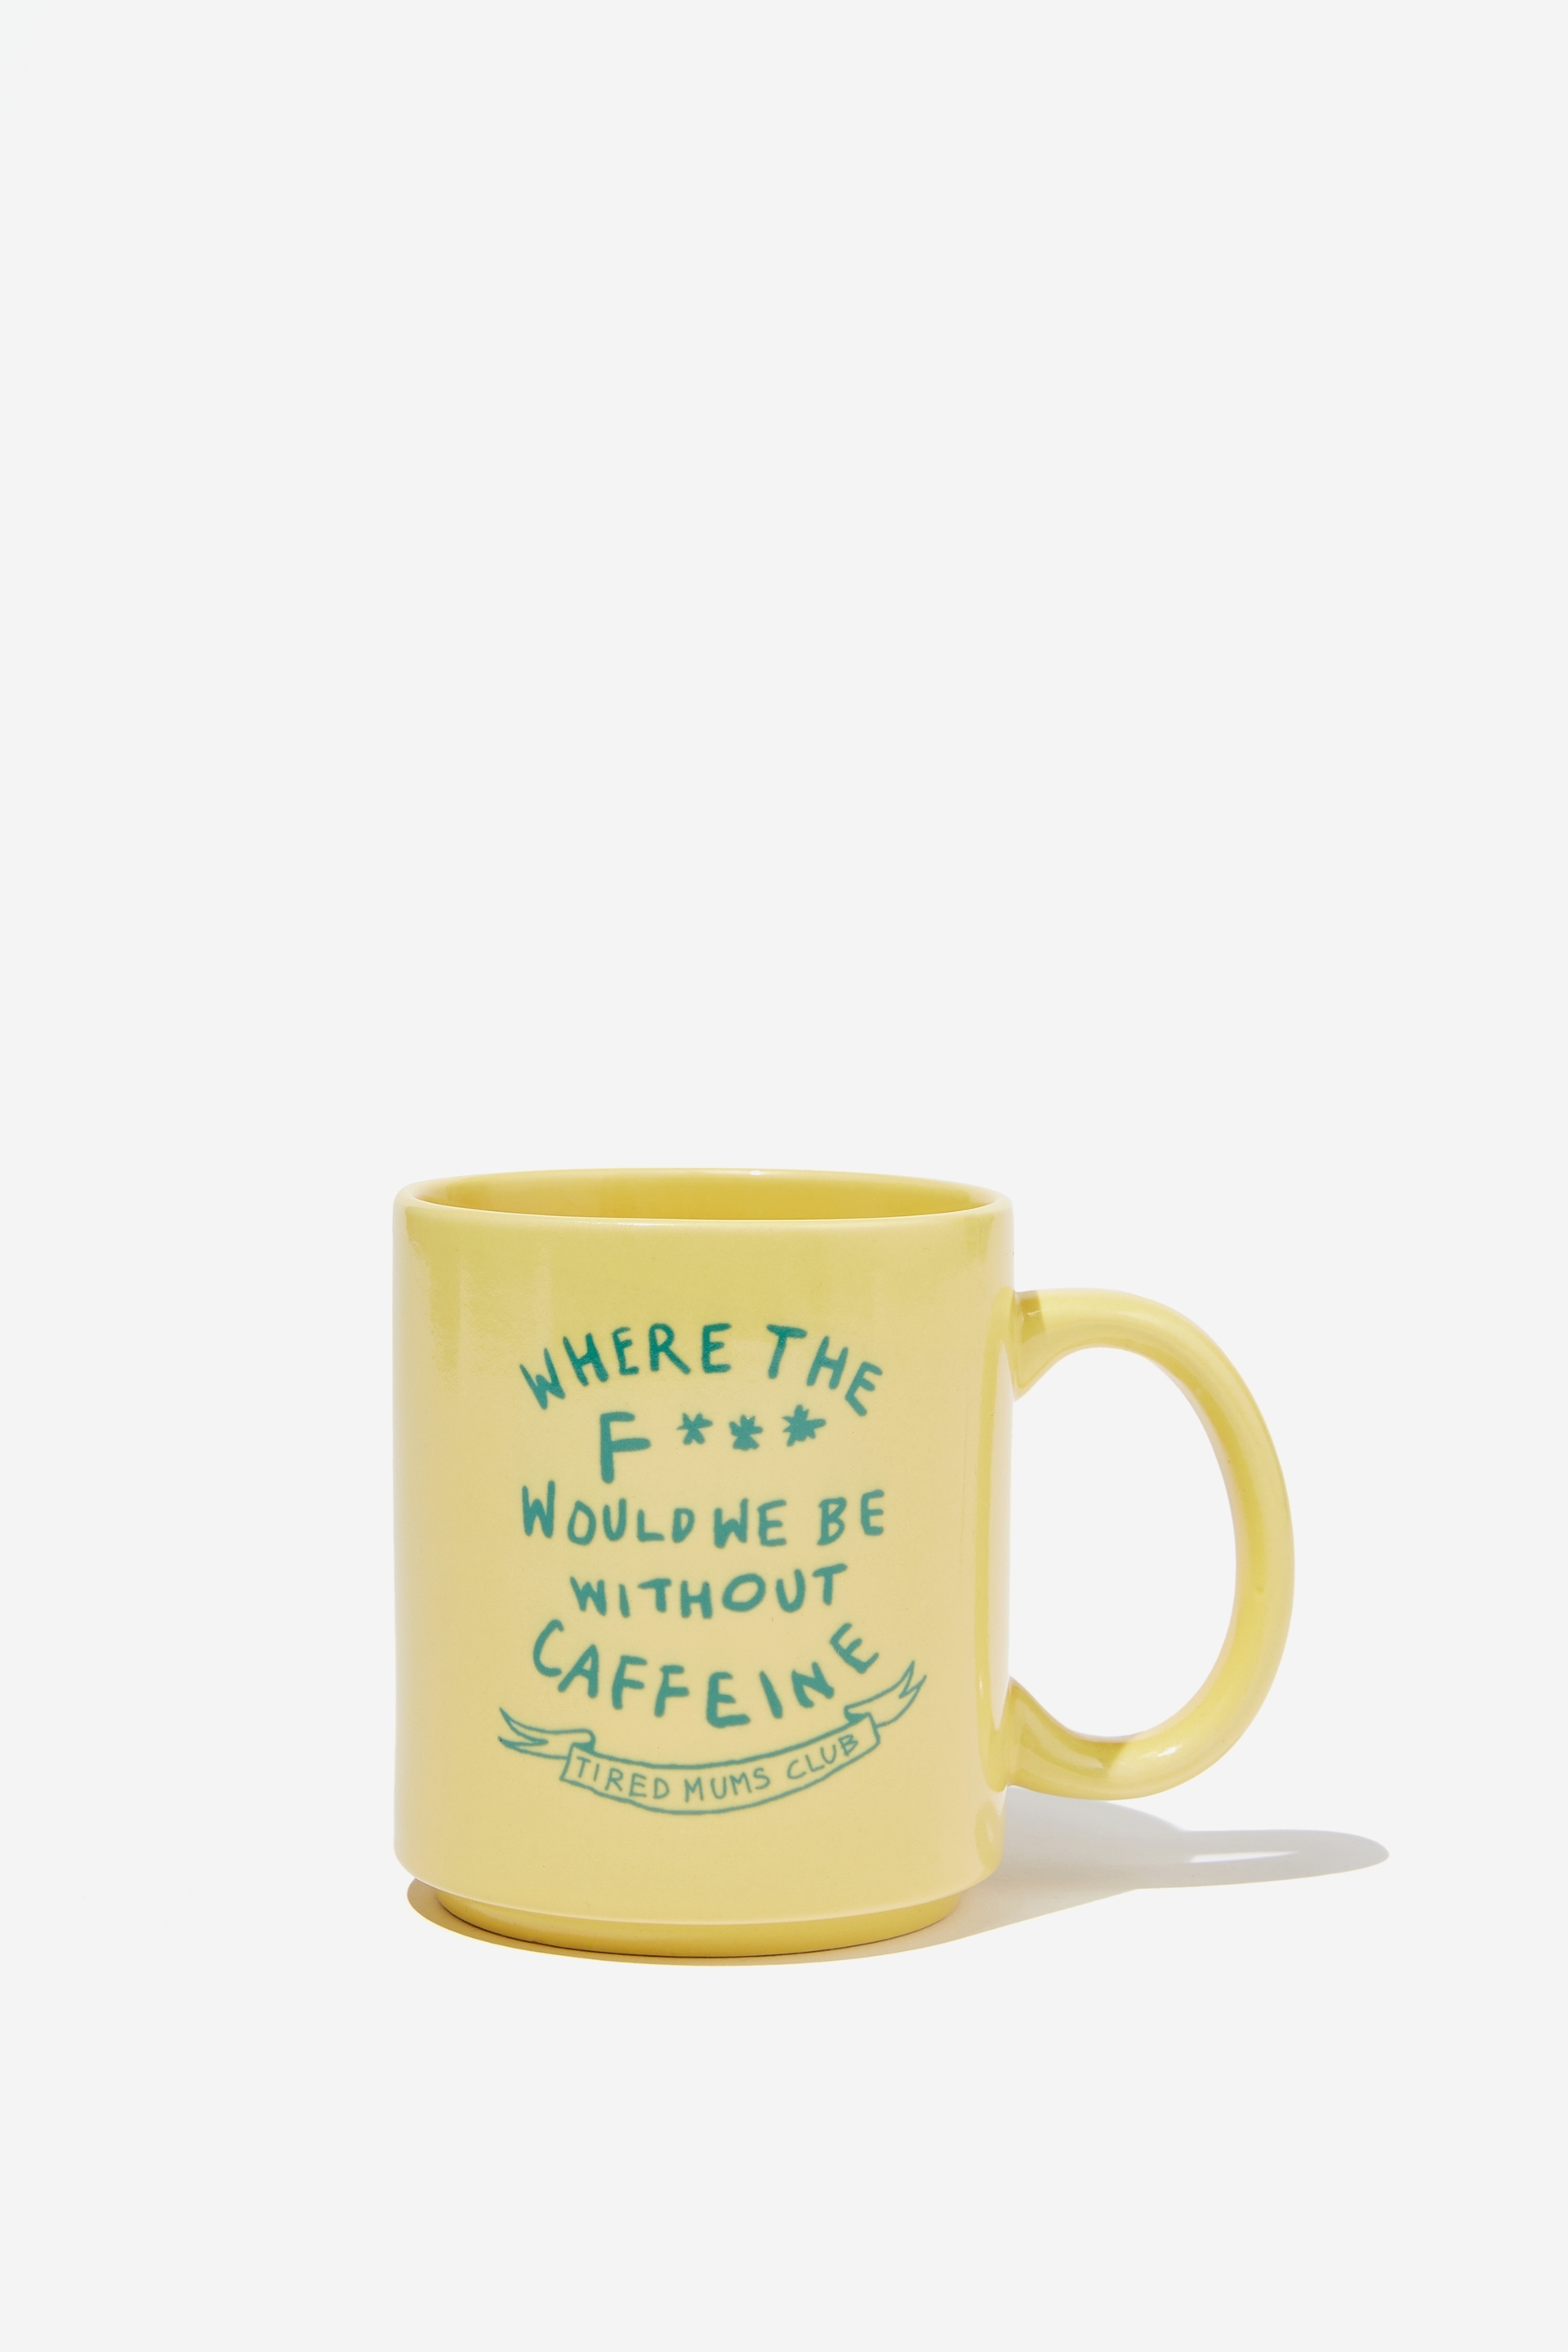 Typo - Limited Edition Mothers Day Mug - Caffeine tired mother pale lemon